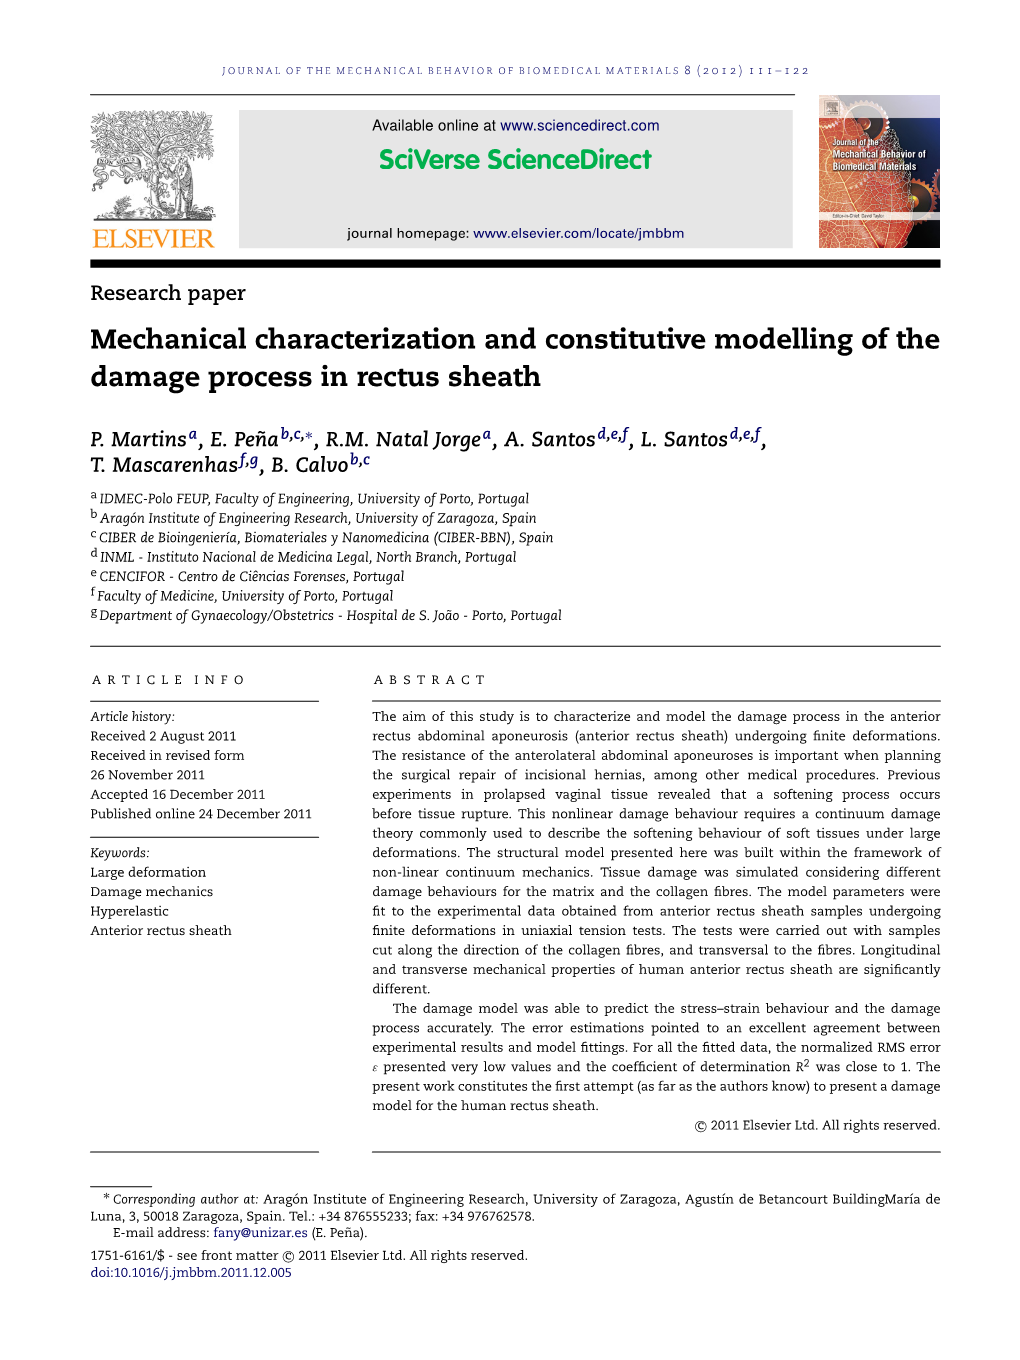 Mechanical Characterization and Constitutive Modelling of the Damage Process in Rectus Sheath